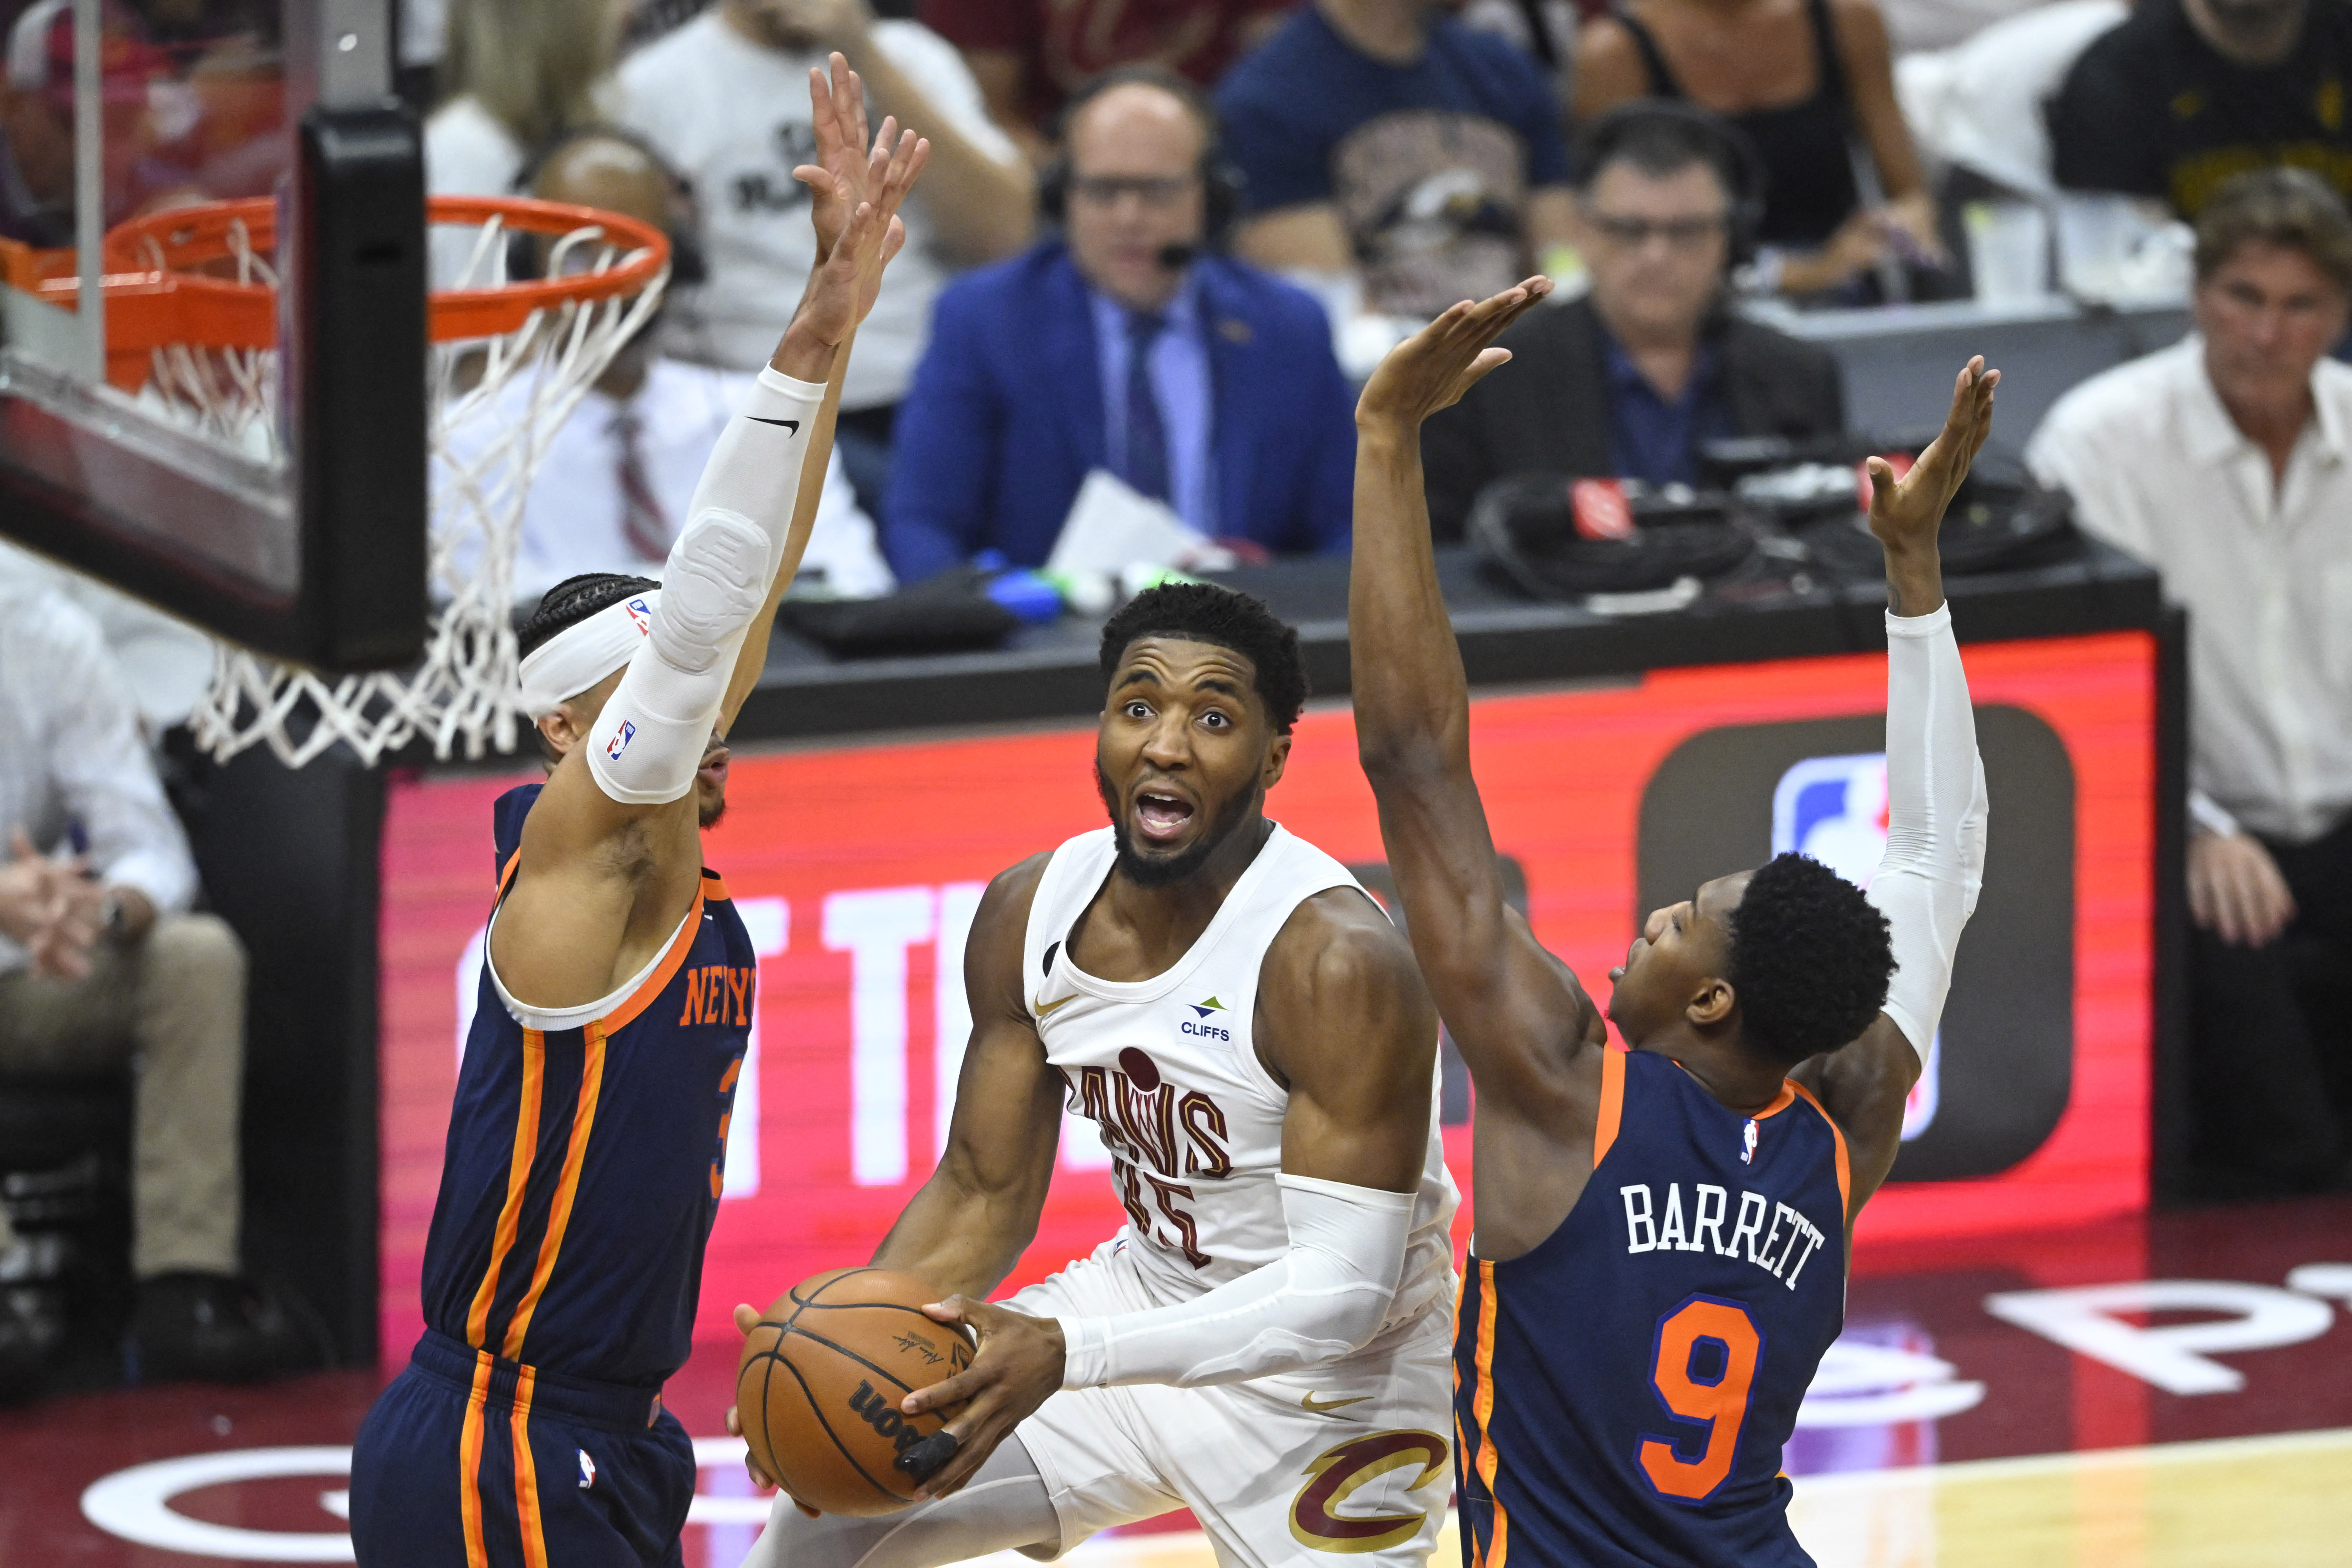 Josh Hart saves Knicks in Game 1 win over Donovan Mitchell, Cavs